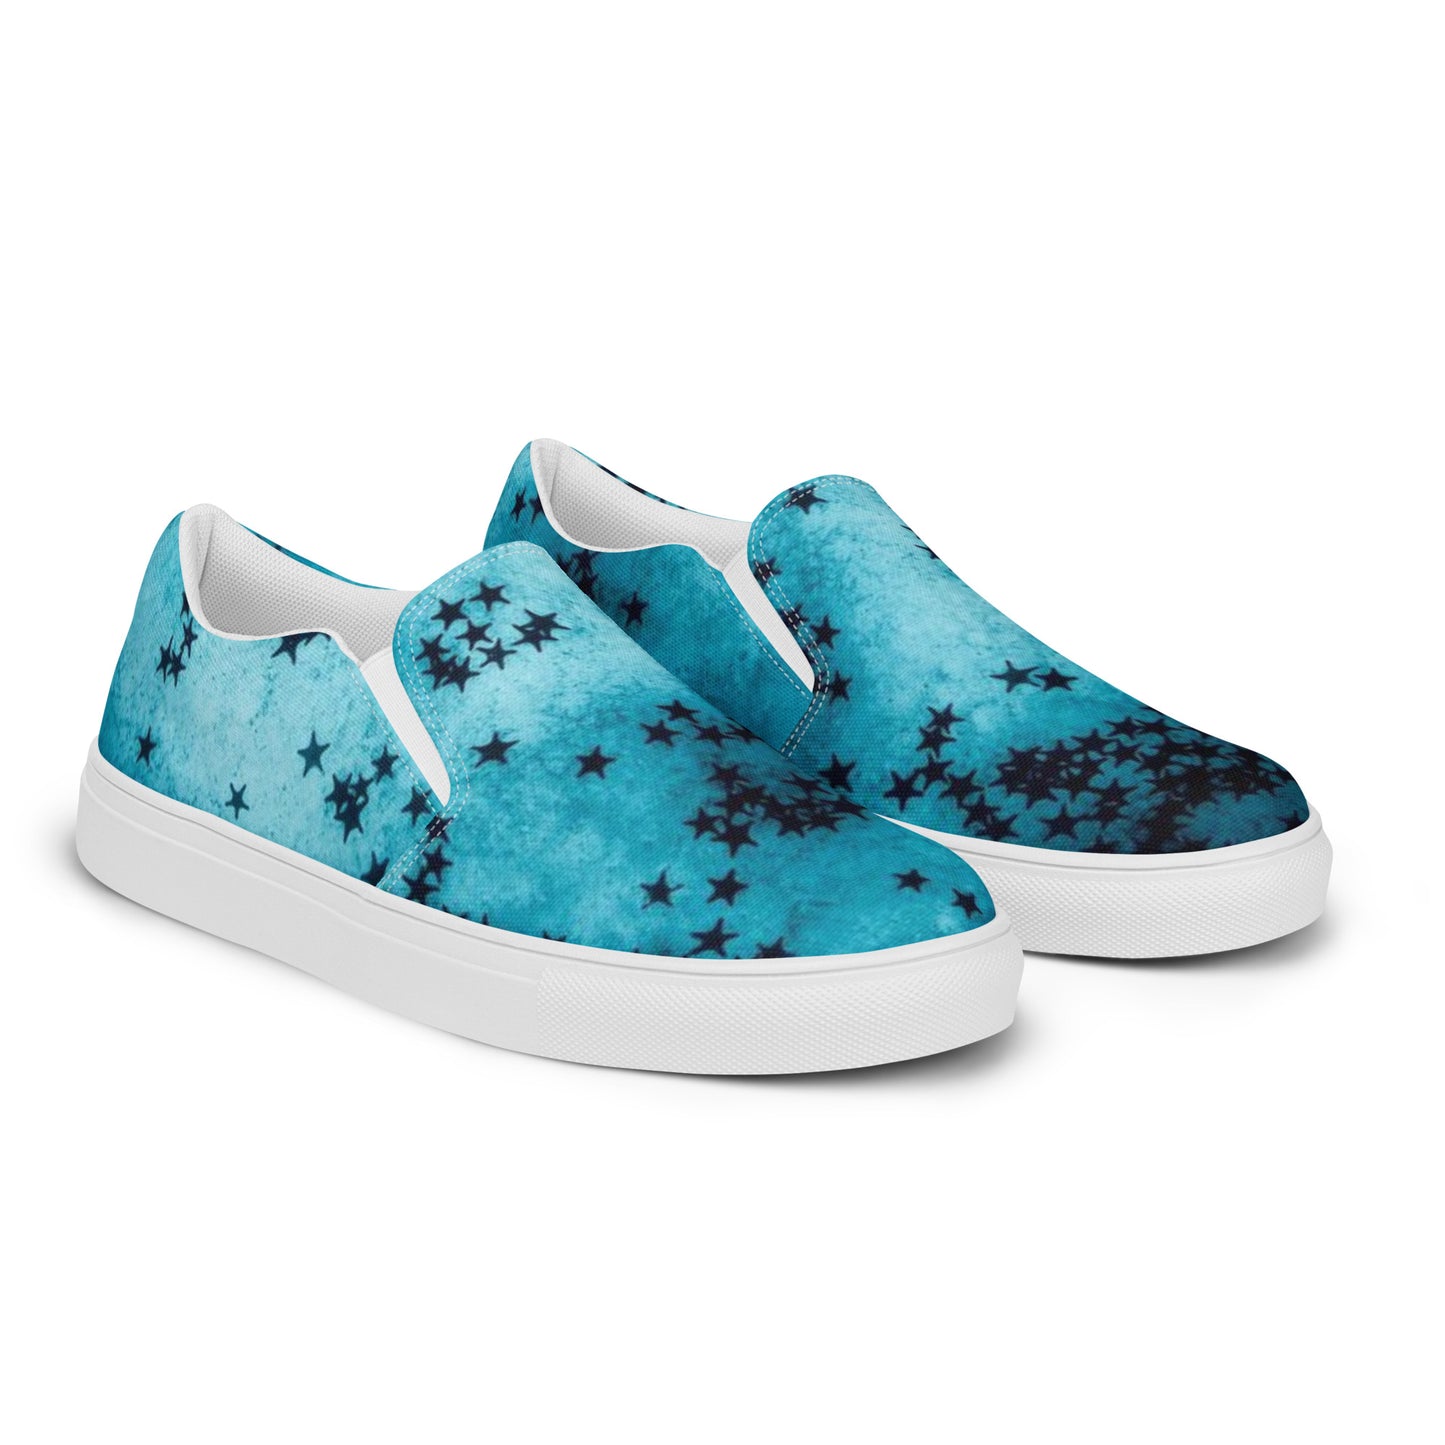 Seeing Stars | Men’s Slip-On Canvas Shoes